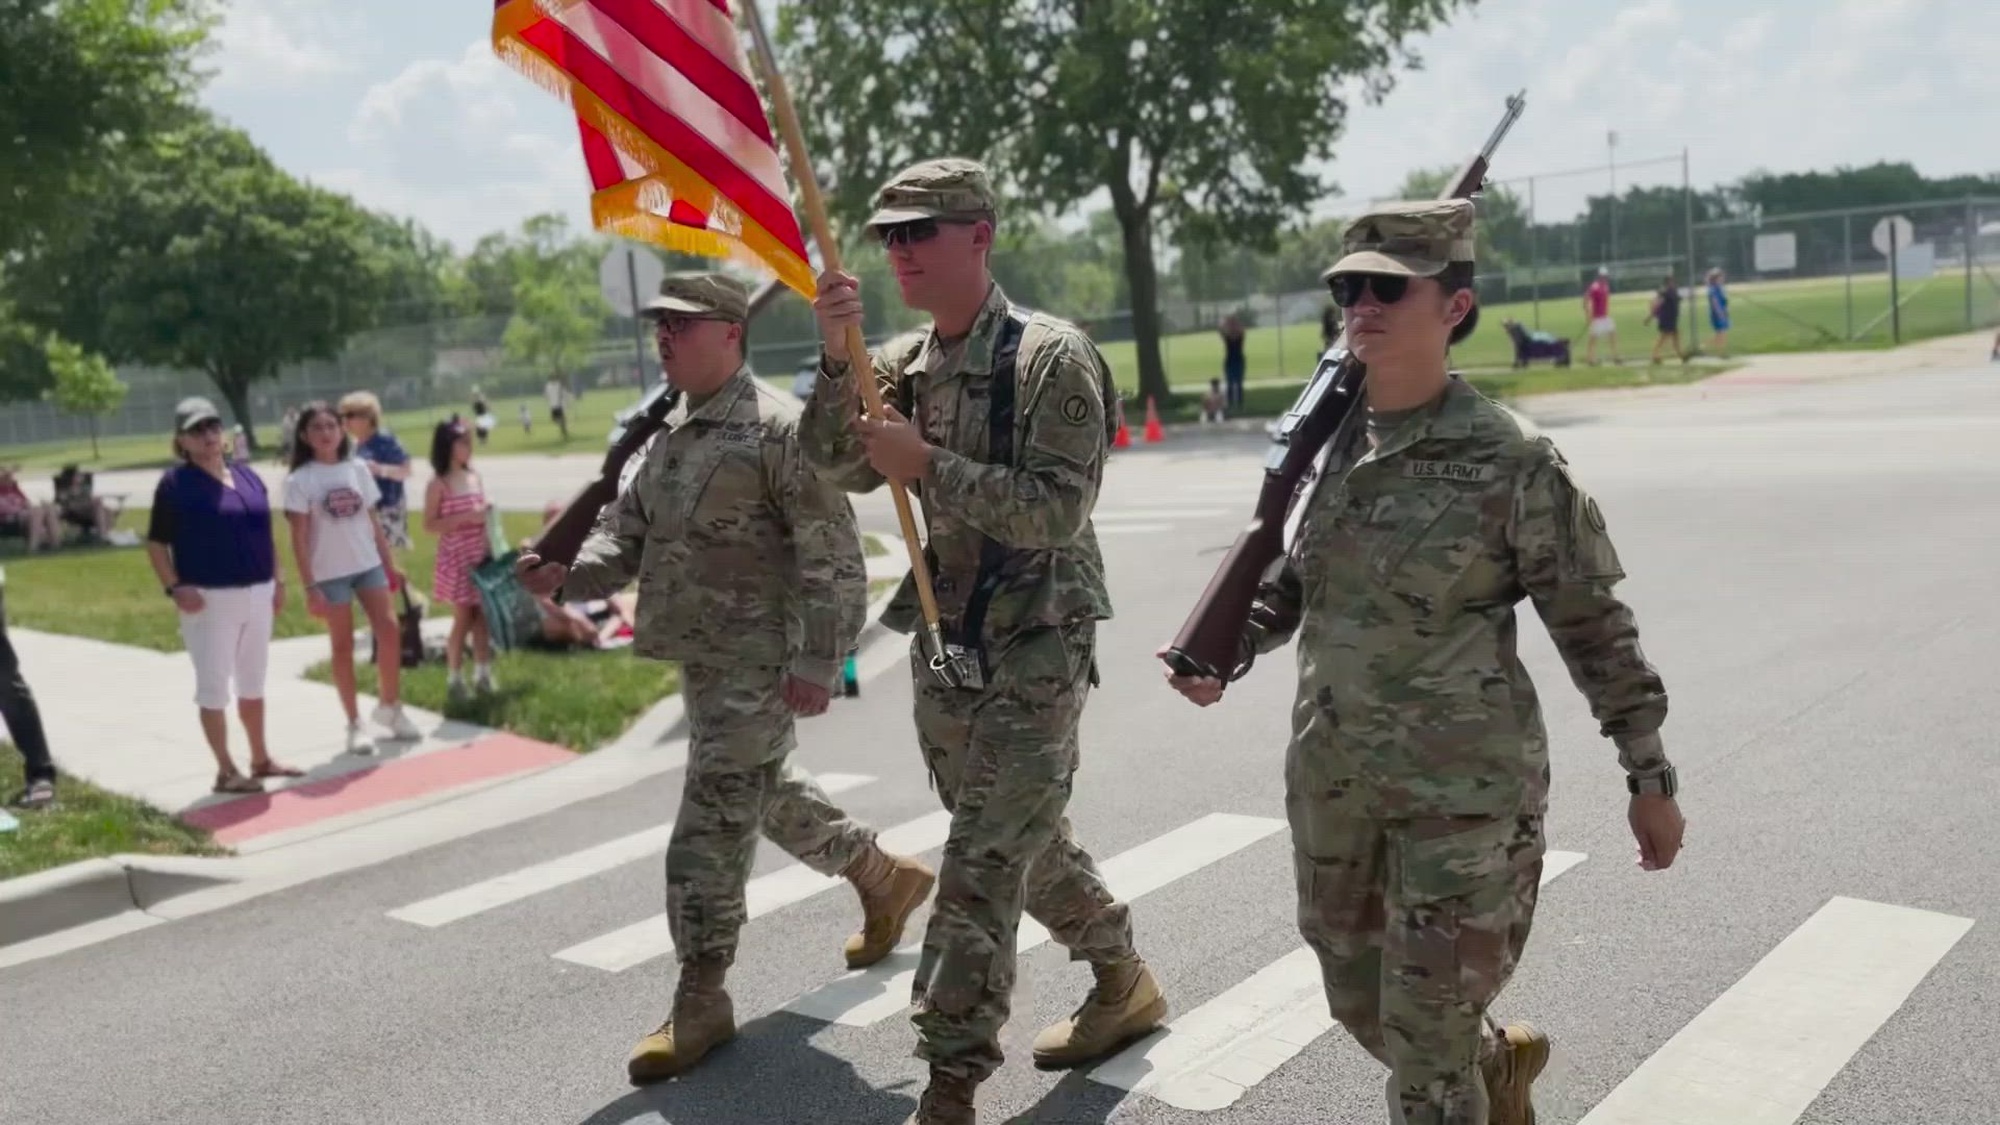 Soldiers assigned to the 85th U.S. Army Reserve Support Command marched in the Village of Rolling Meadows Independence Day parade, July 4, 2023. Shortly a month after celebrating the U.S. Army's 248th birthday, Soldiers today continue to support the spirit and ideals of the founders by defending liberty and free people around the world.
(U.S. Army Reserve video by Staff Sgt. Erika Whitaker)